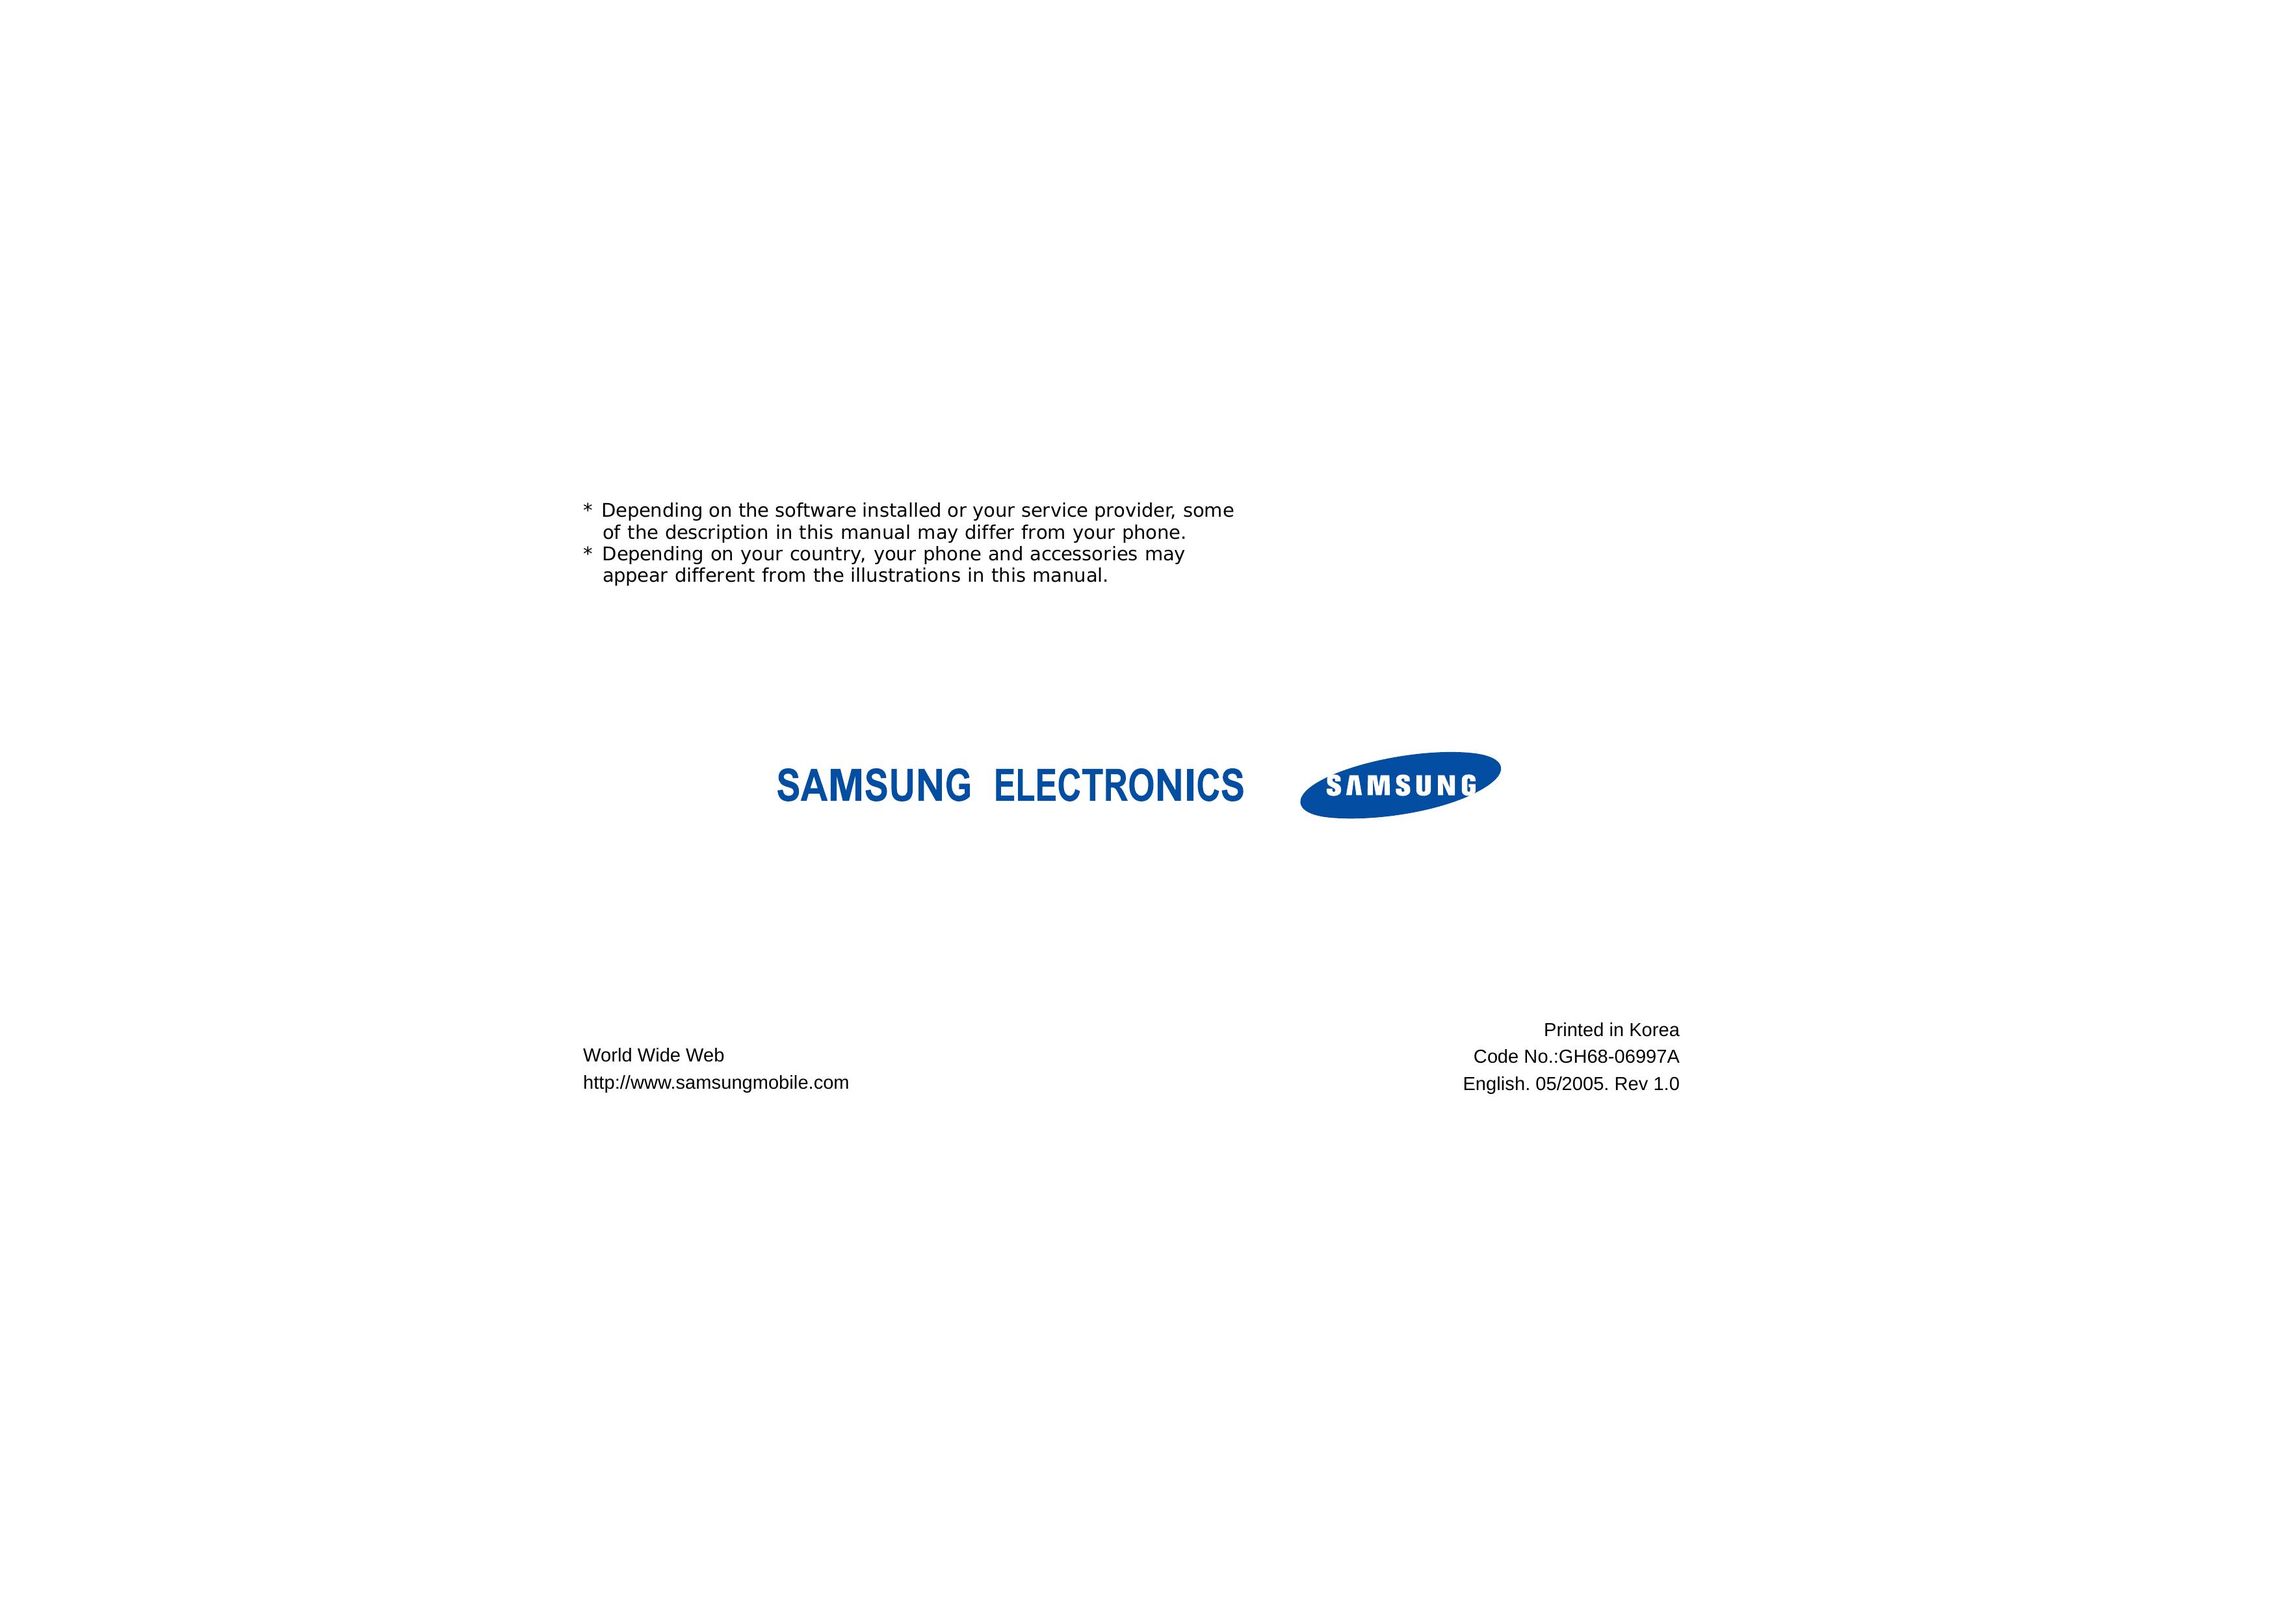 Samsung GH68-06997A All in One Printer User Manual